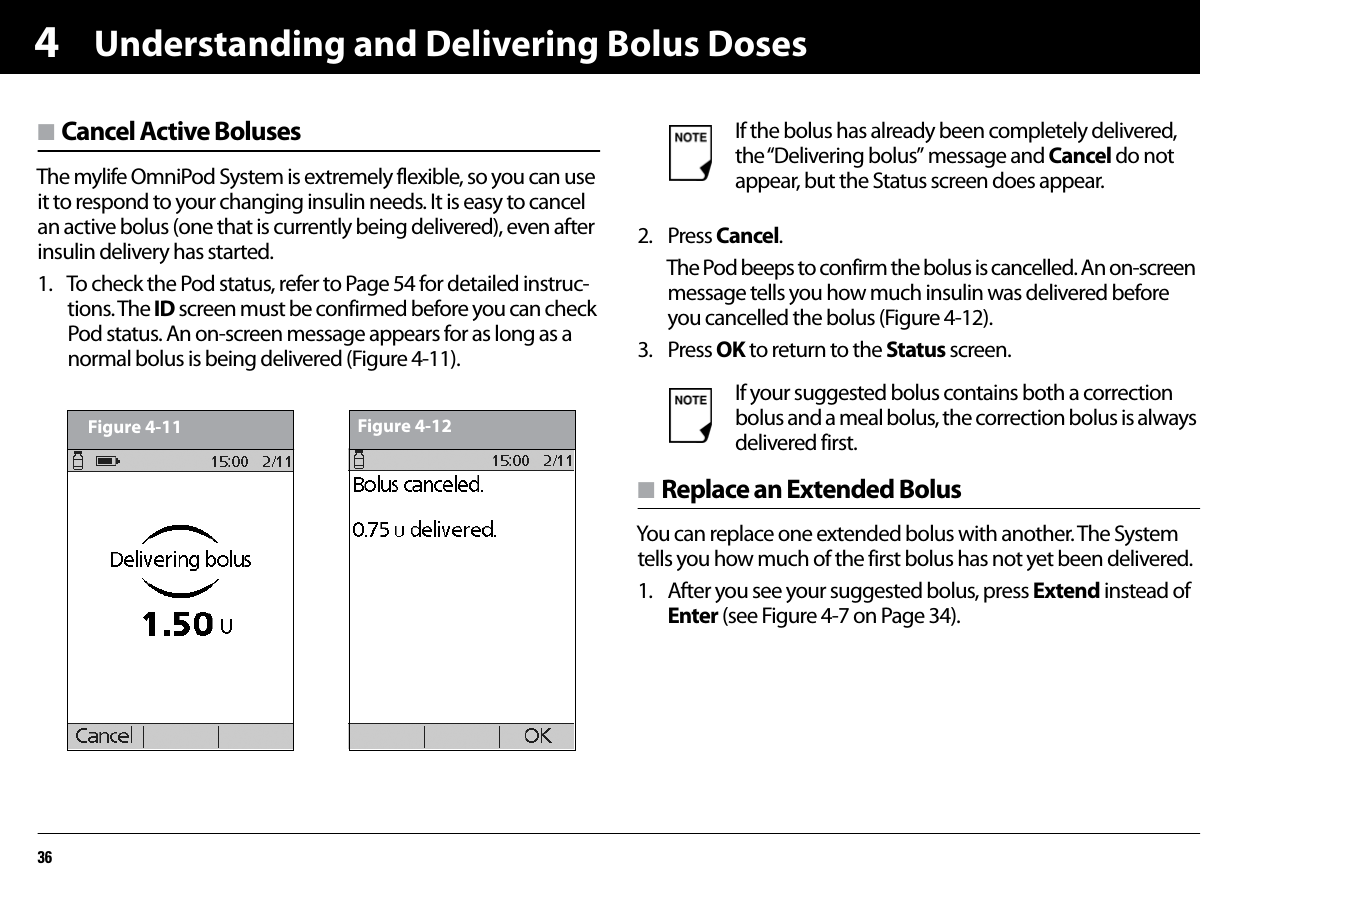 Understanding and Delivering Bolus Doses364n Cancel Active BolusesThe mylife OmniPod System is extremely flexible, so you can use it to respond to your changing insulin needs. It is easy to cancel an active bolus (one that is currently being delivered), even after insulin delivery has started.1. To check the Pod status, refer to Page 54 for detailed instruc-tions. The ID screen must be confirmed before you can check Pod status. An on-screen message appears for as long as a normal bolus is being delivered (Figure 4-11).   2. Press Cancel.The Pod beeps to confirm the bolus is cancelled. An on-screen message tells you how much insulin was delivered before you cancelled the bolus (Figure 4-12).3. Press OK to return to the Status screen. n Replace an Extended BolusYou can replace one extended bolus with another. The System tells you how much of the first bolus has not yet been delivered.1. After you see your suggested bolus, press Extend instead of Enter (see Figure 4-7 on Page 34).Figure 4-11 Figure 4-12If the bolus has already been completely delivered, the “Delivering bolus” message and Cancel do not appear, but the Status screen does appear.If your suggested bolus contains both a correction bolus and a meal bolus, the correction bolus is always delivered first.